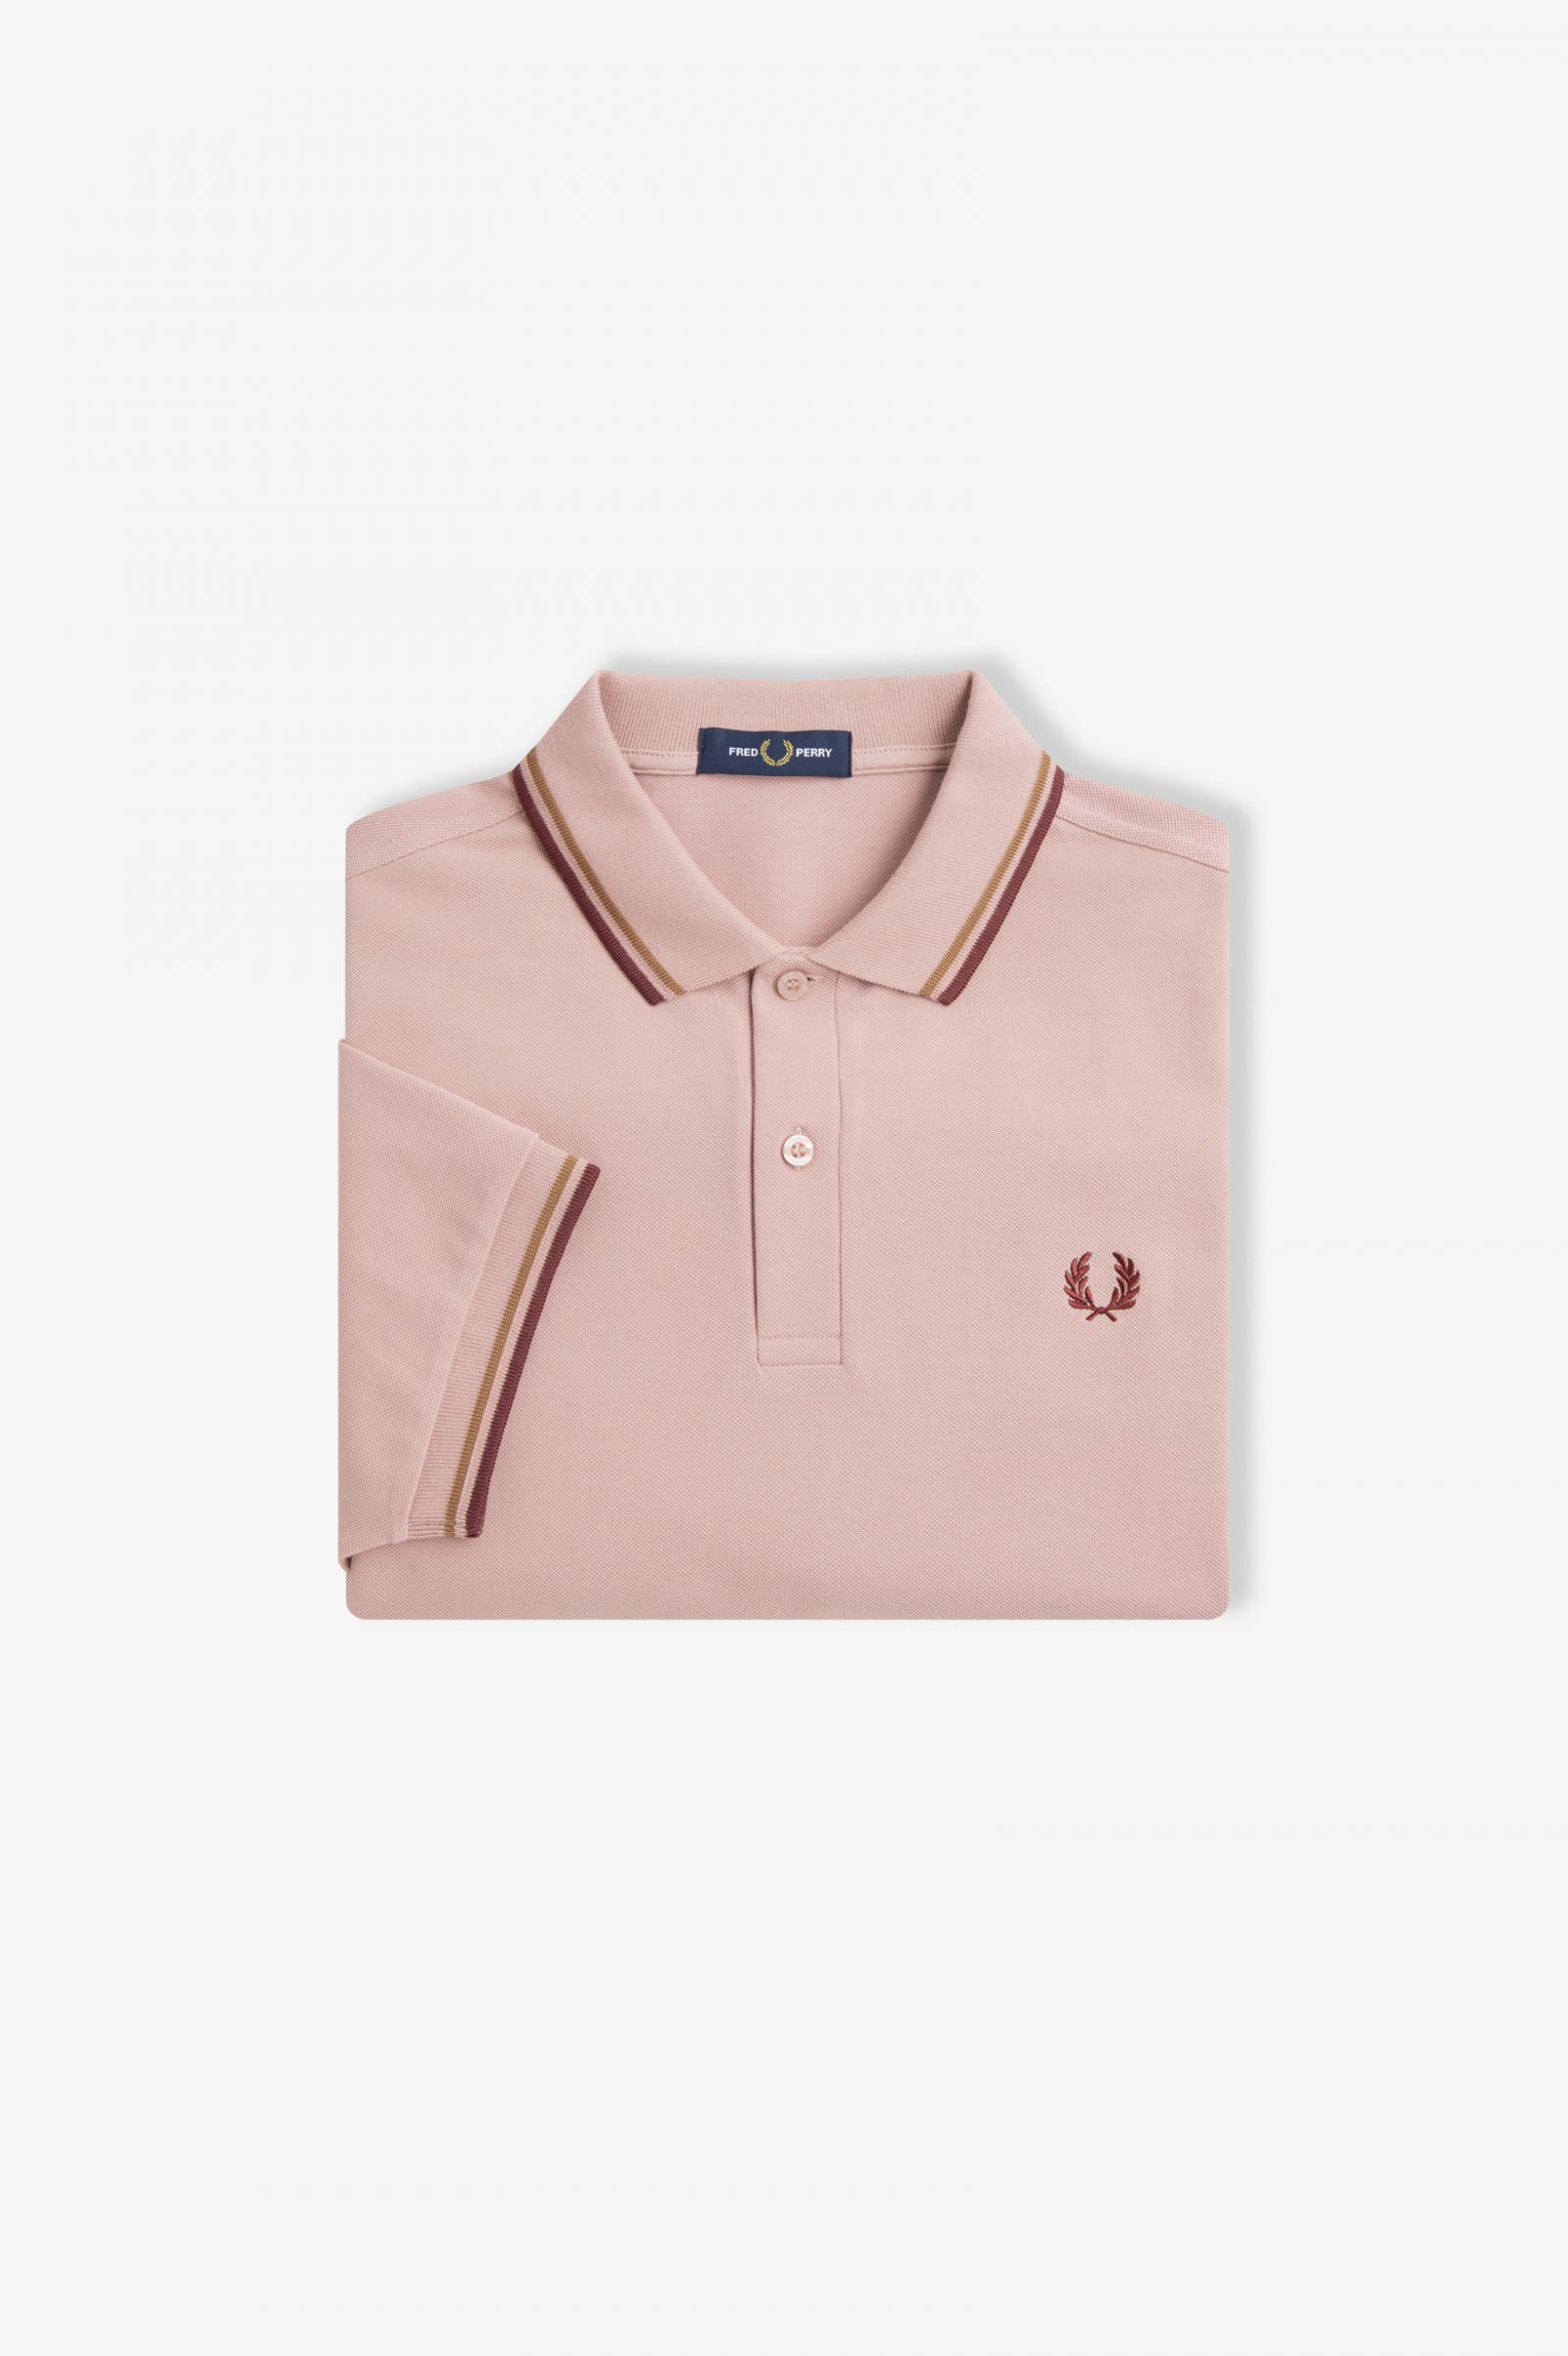 Fred perry pink